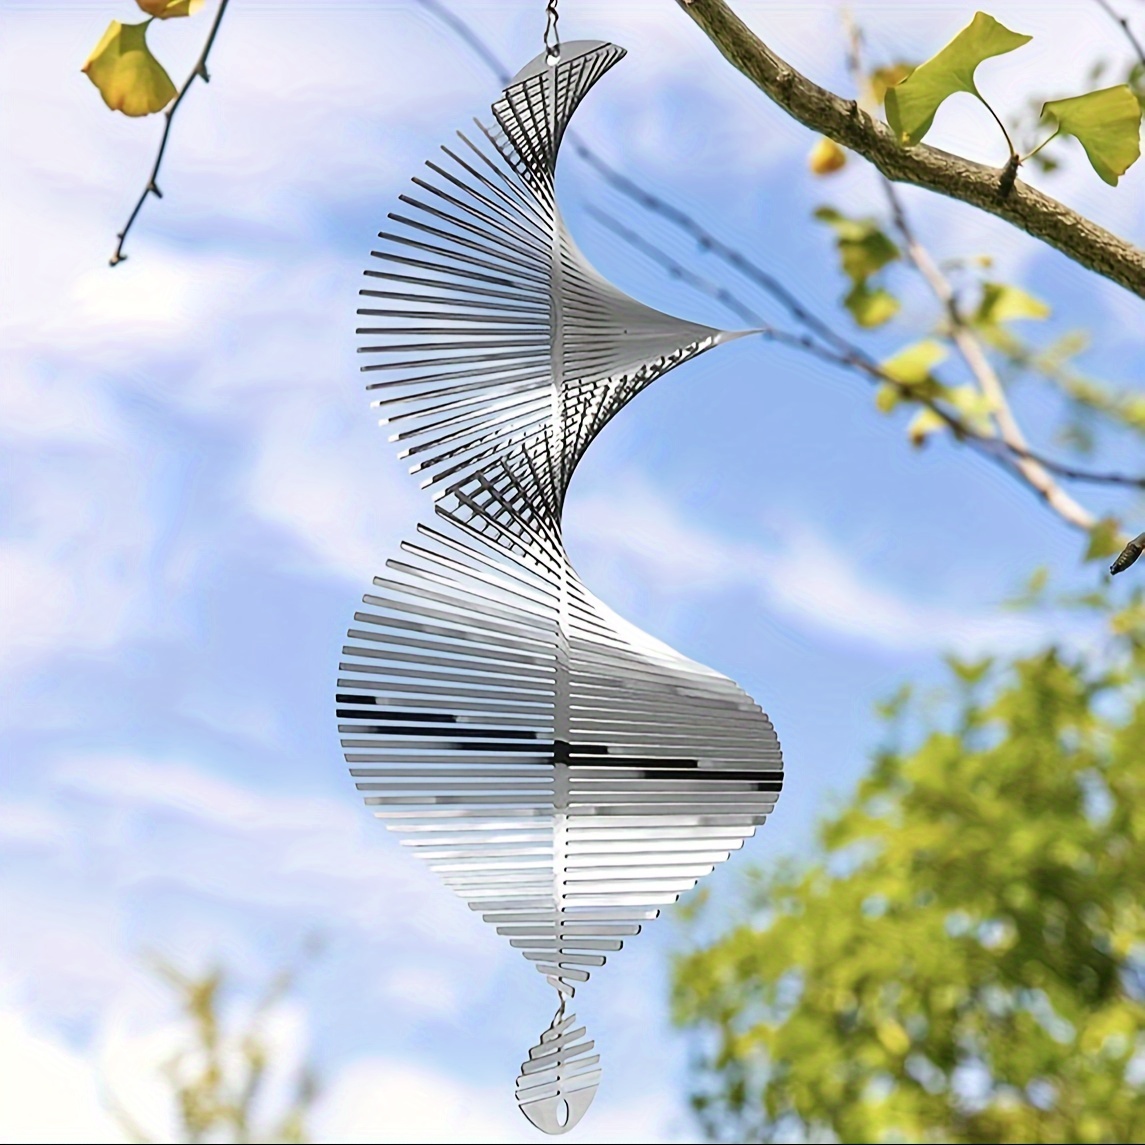 

1pc Stainless Steel Spiral Wind Spinner, 3d Reflective Twister, 11.8" Hanging Kinetic Sculpture, Garden Decoration, Outdoor Patio Ornaments, Weather-resistant, With Swivel Hook